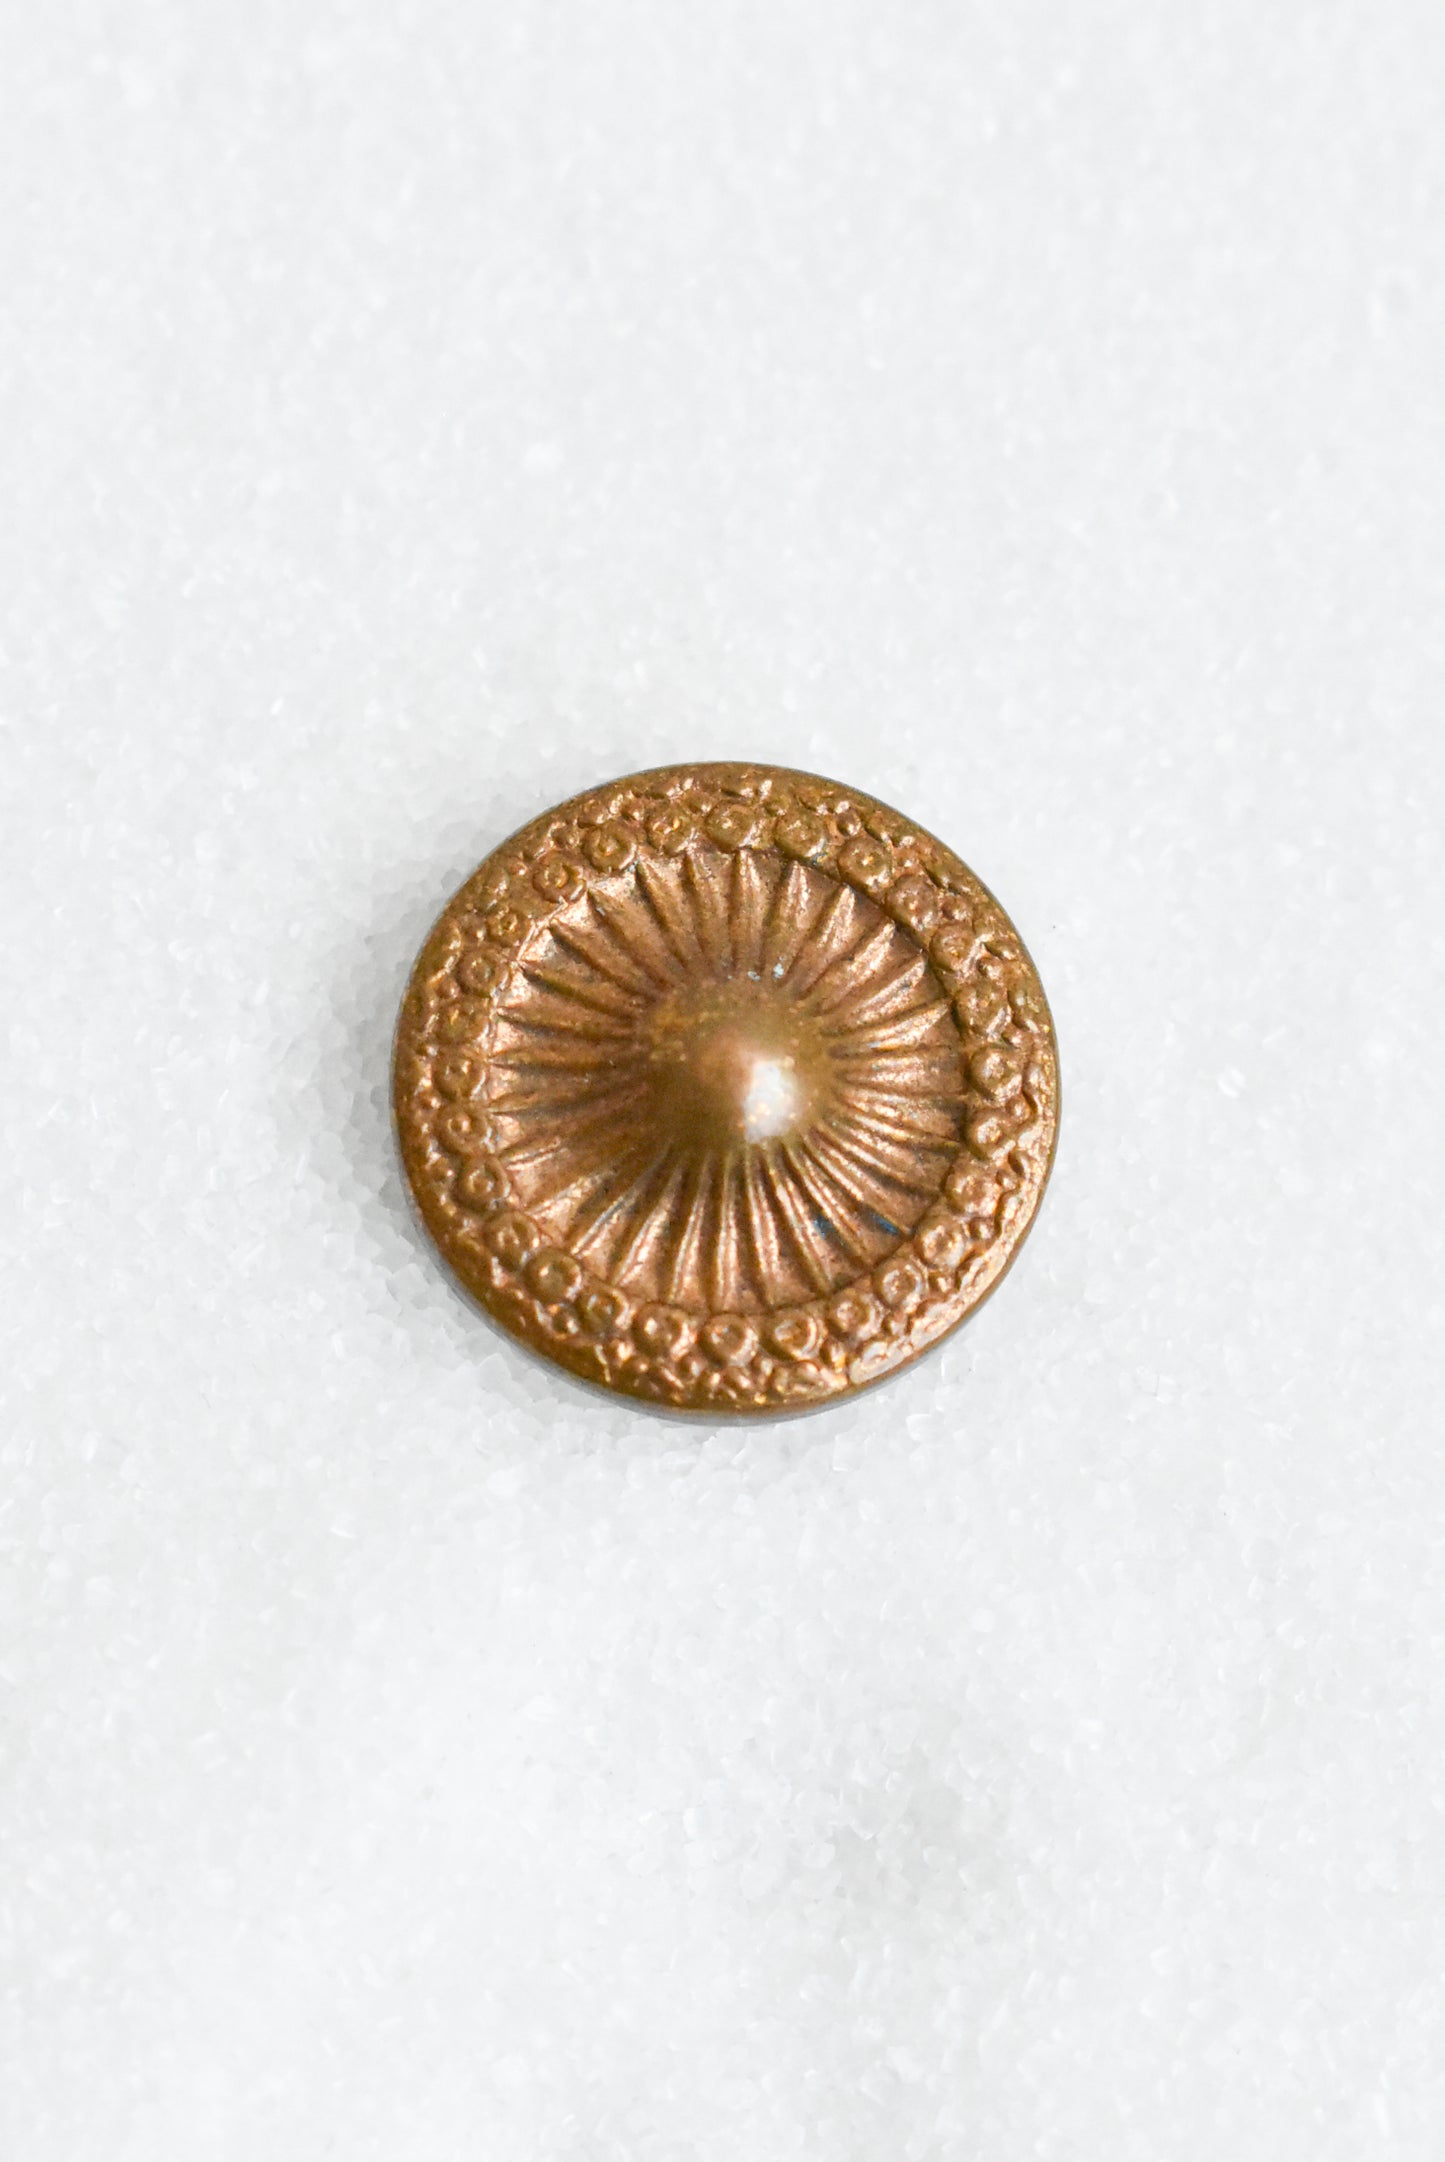 Fancy vintage French buttons